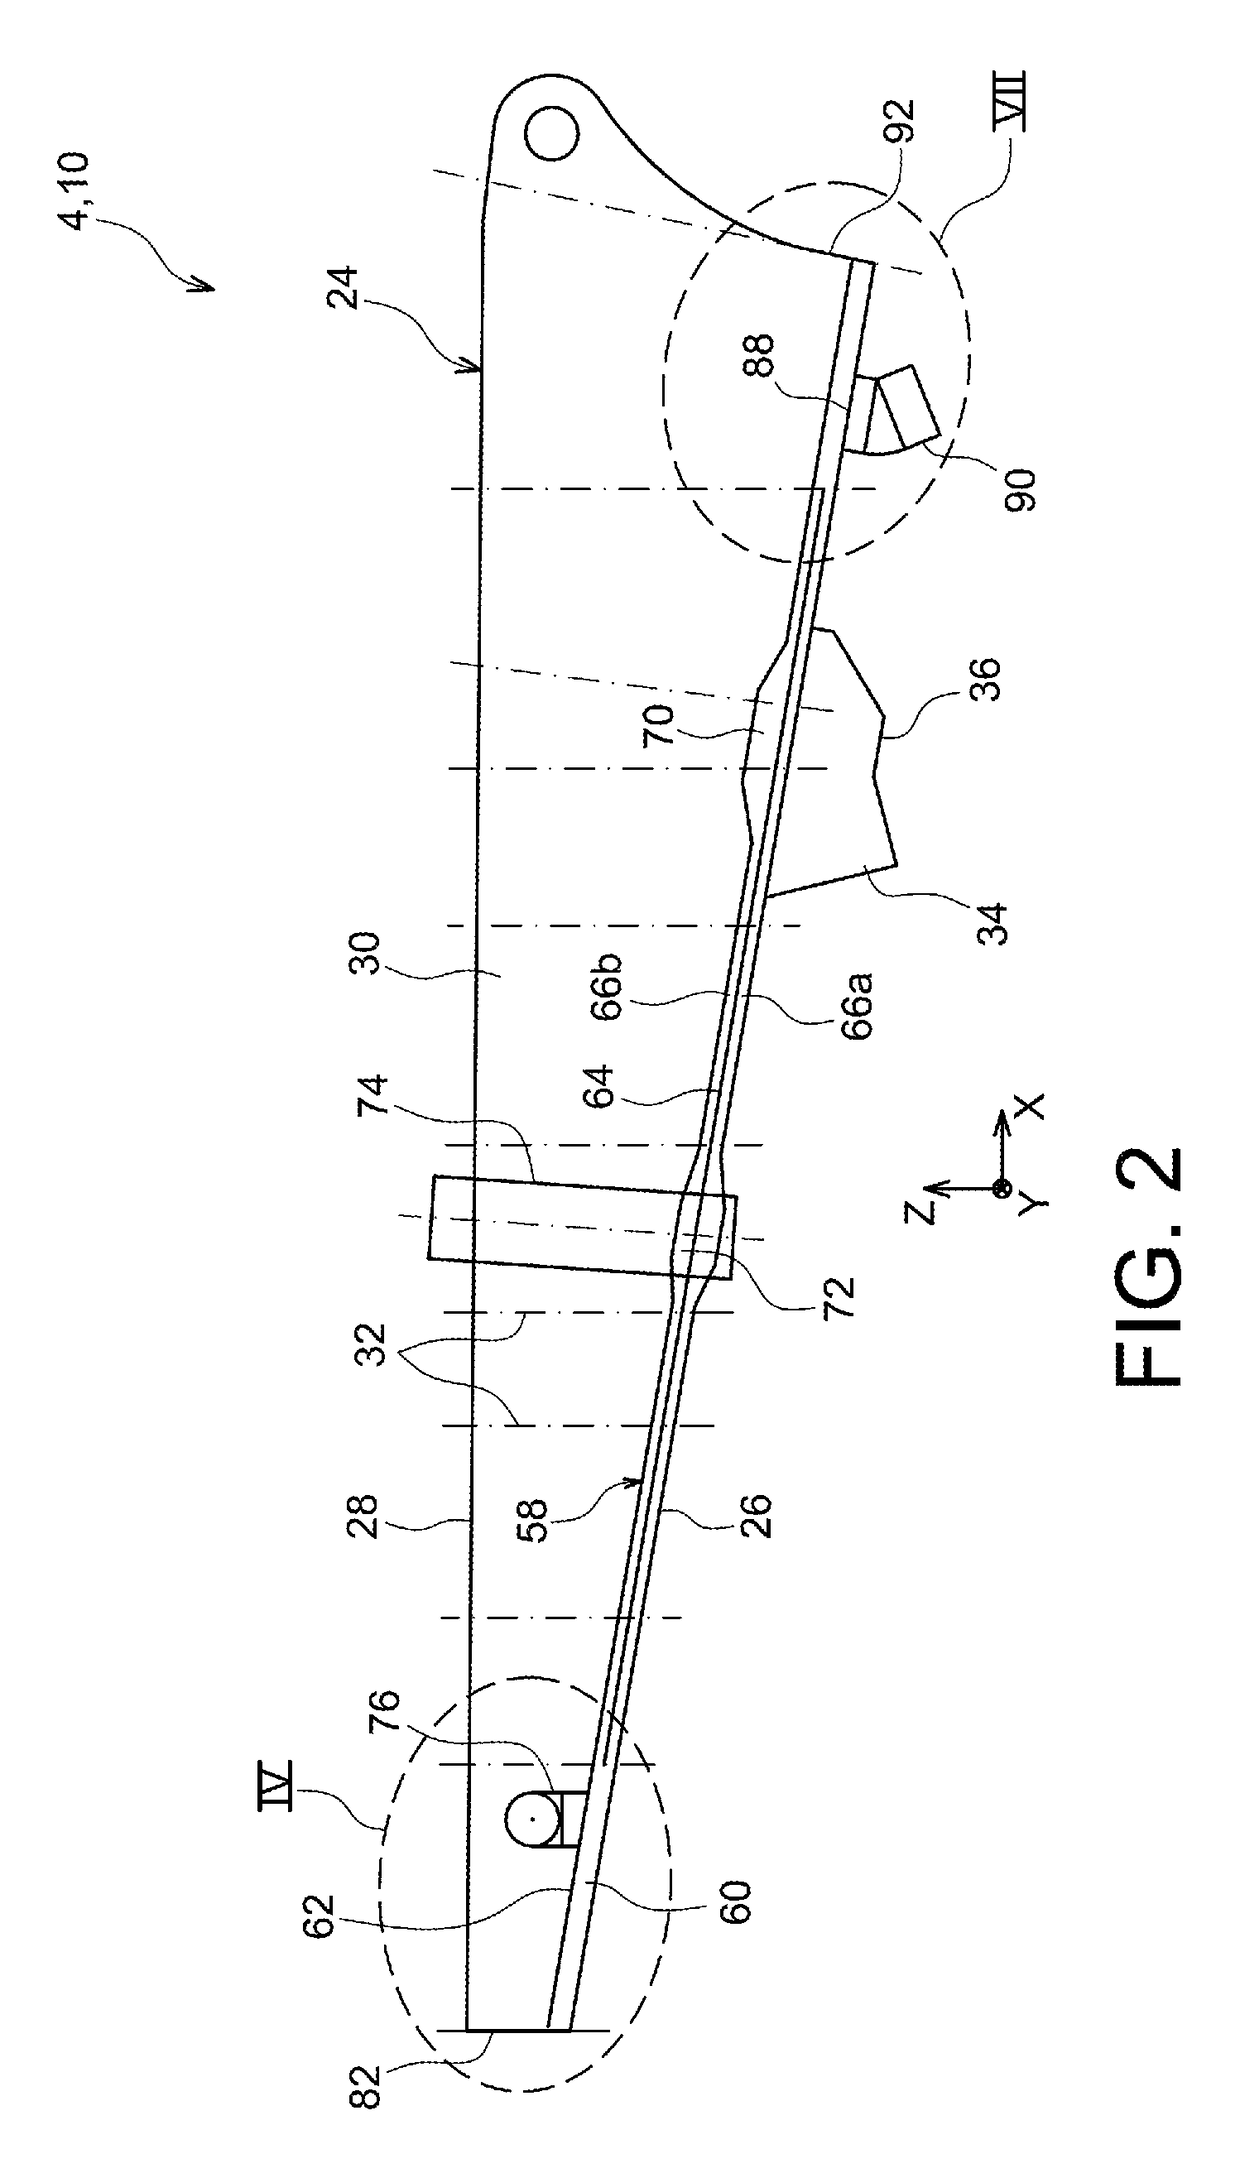 Aircraft propelling assembly including a duct forming a thermal barrier integrated in the caisson of the rigid structure of the engine mounting system